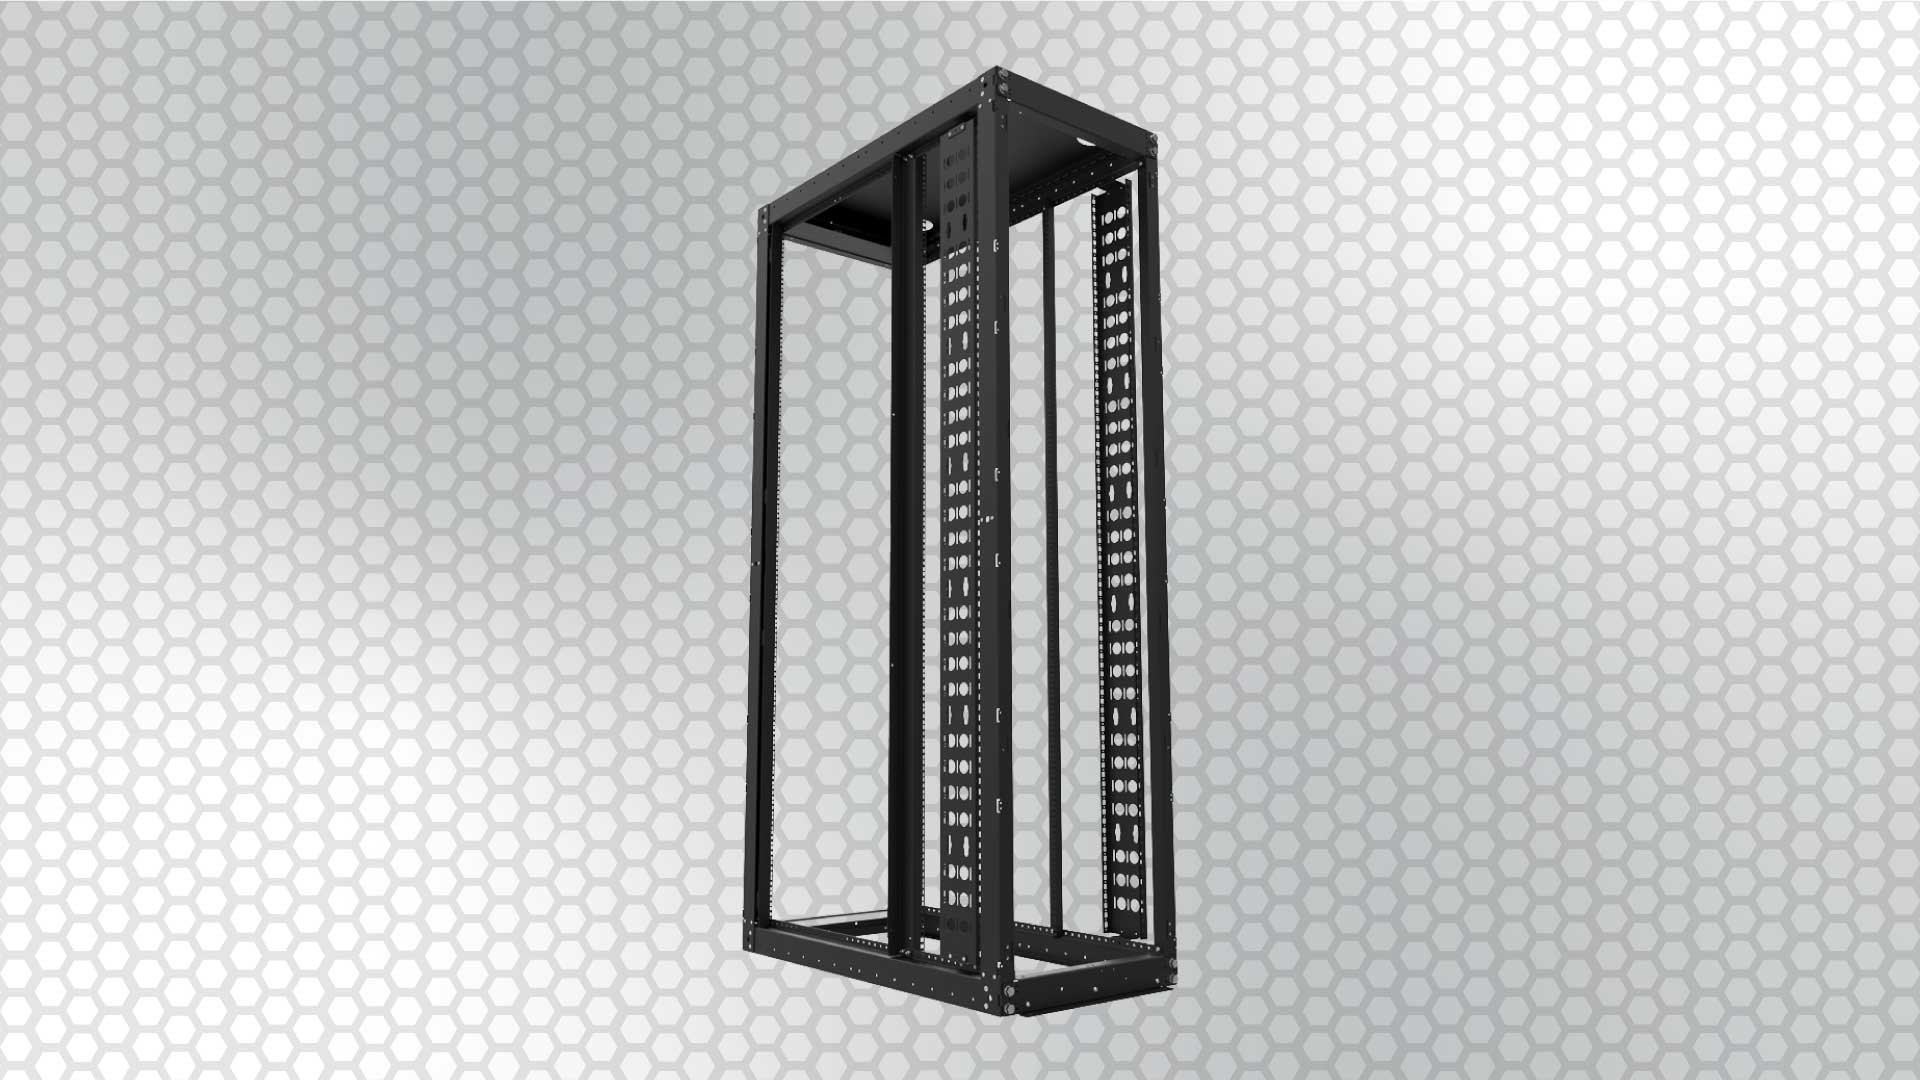 Pros and cons of open frame server racks